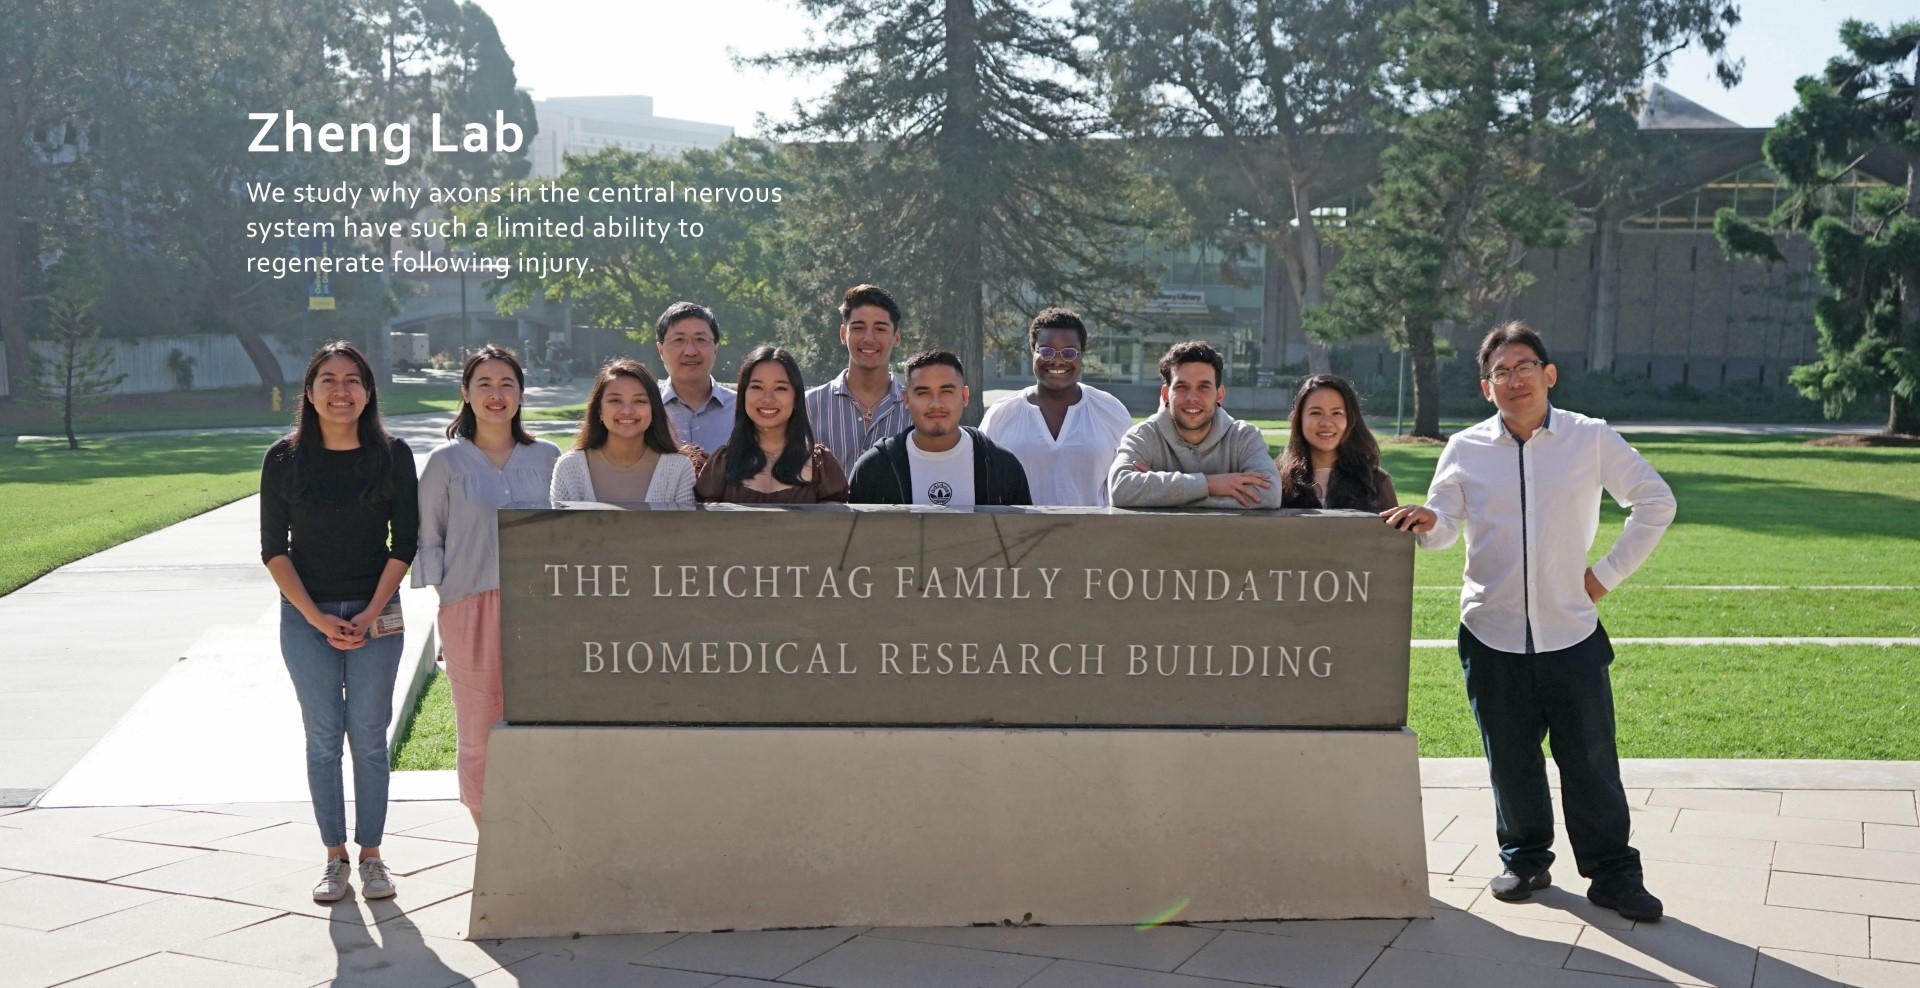 zheng lab members standing outside in front of the leichtag biomedical research building sign